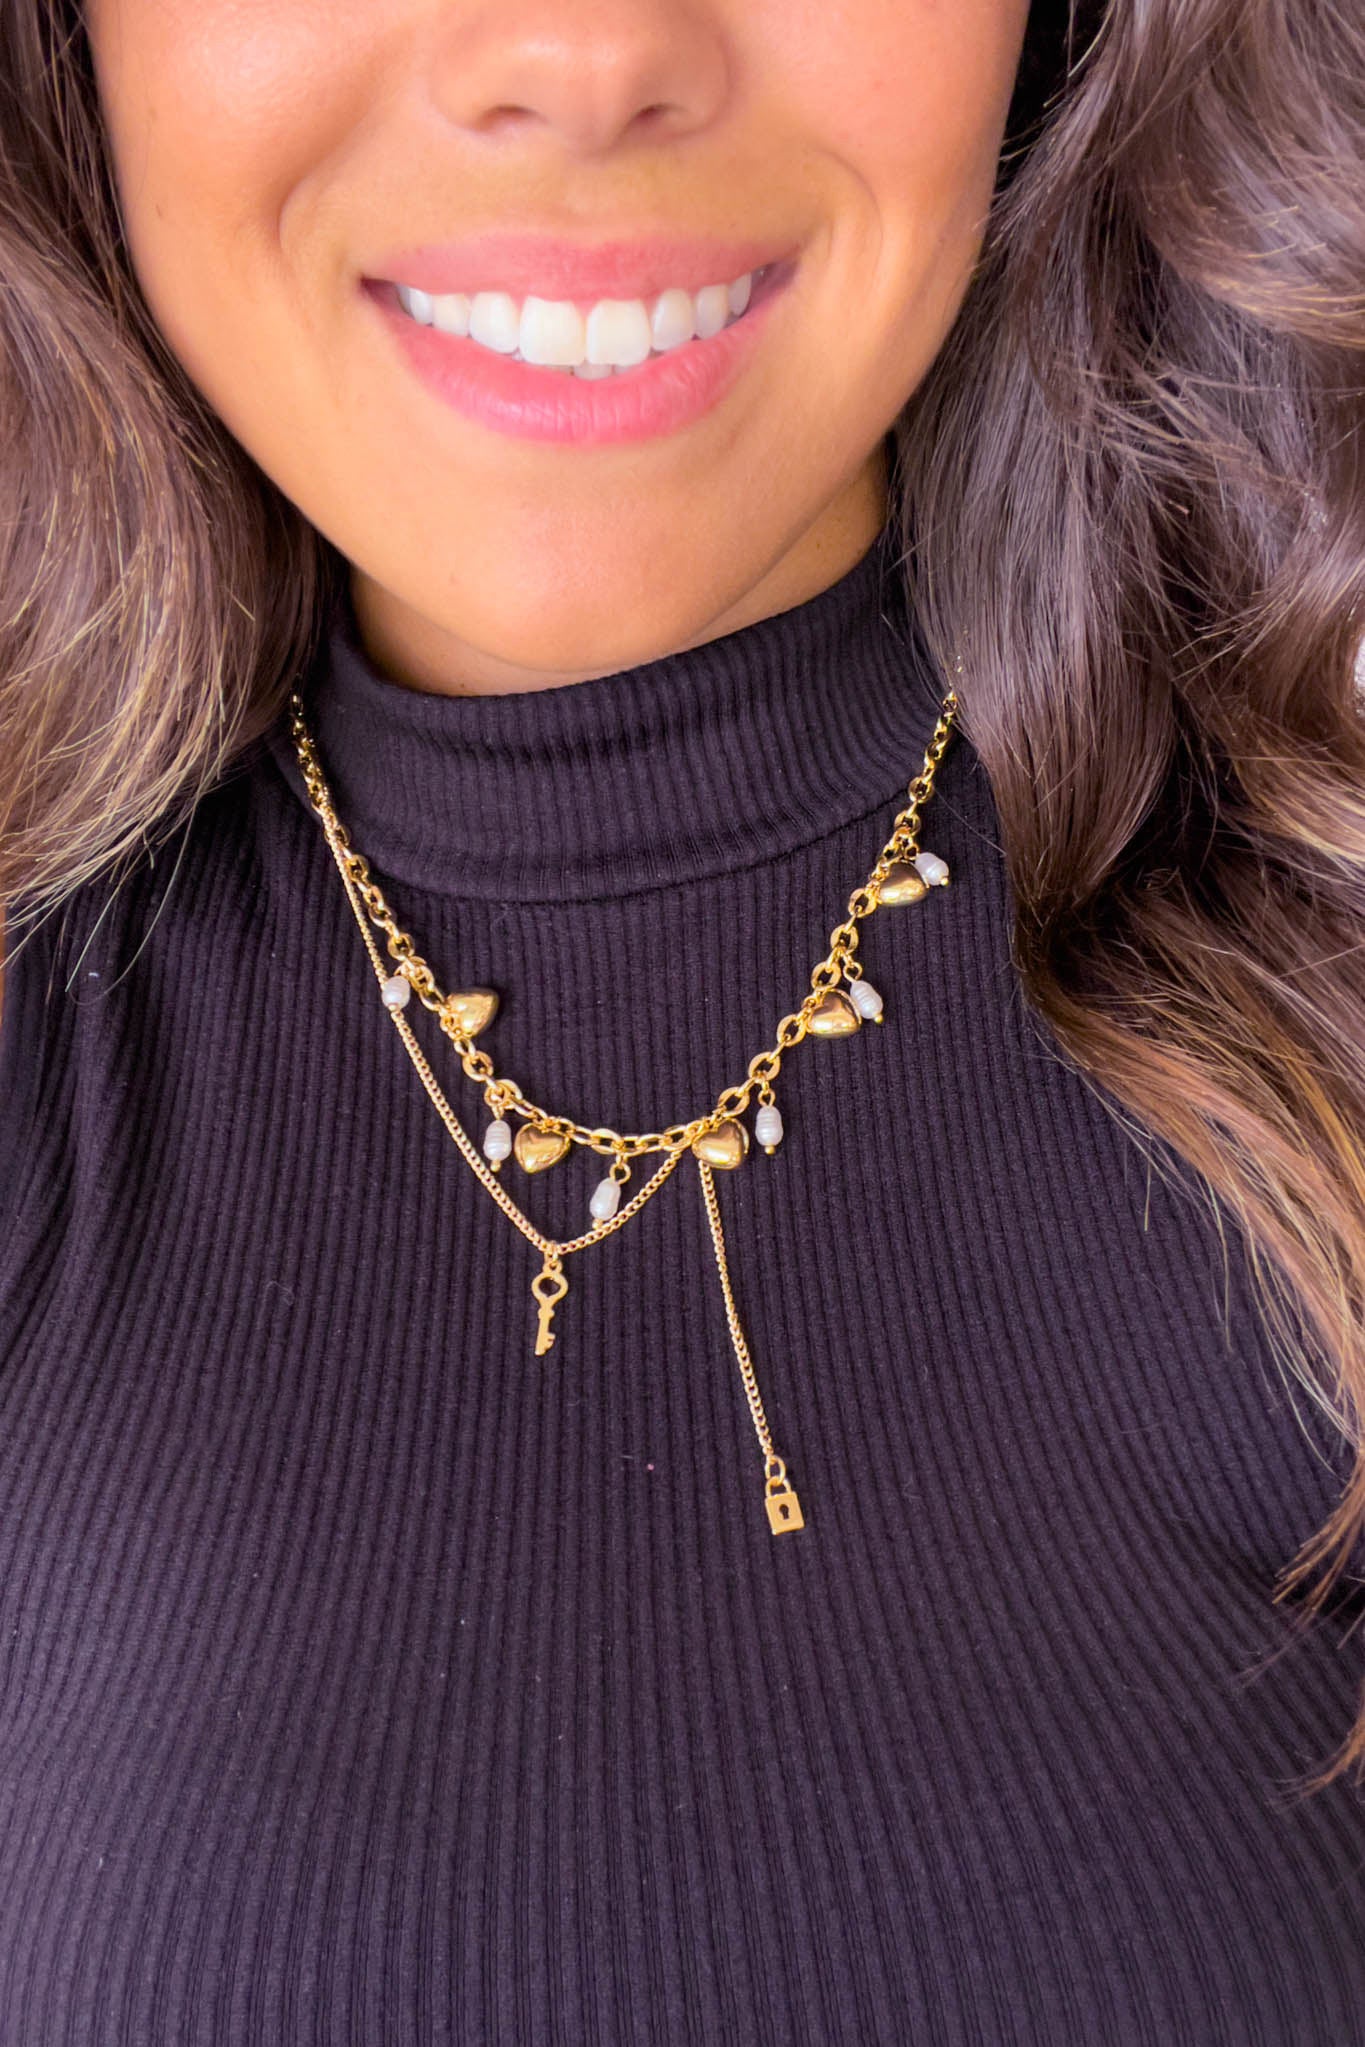 gold asymmetric necklace with heart drops